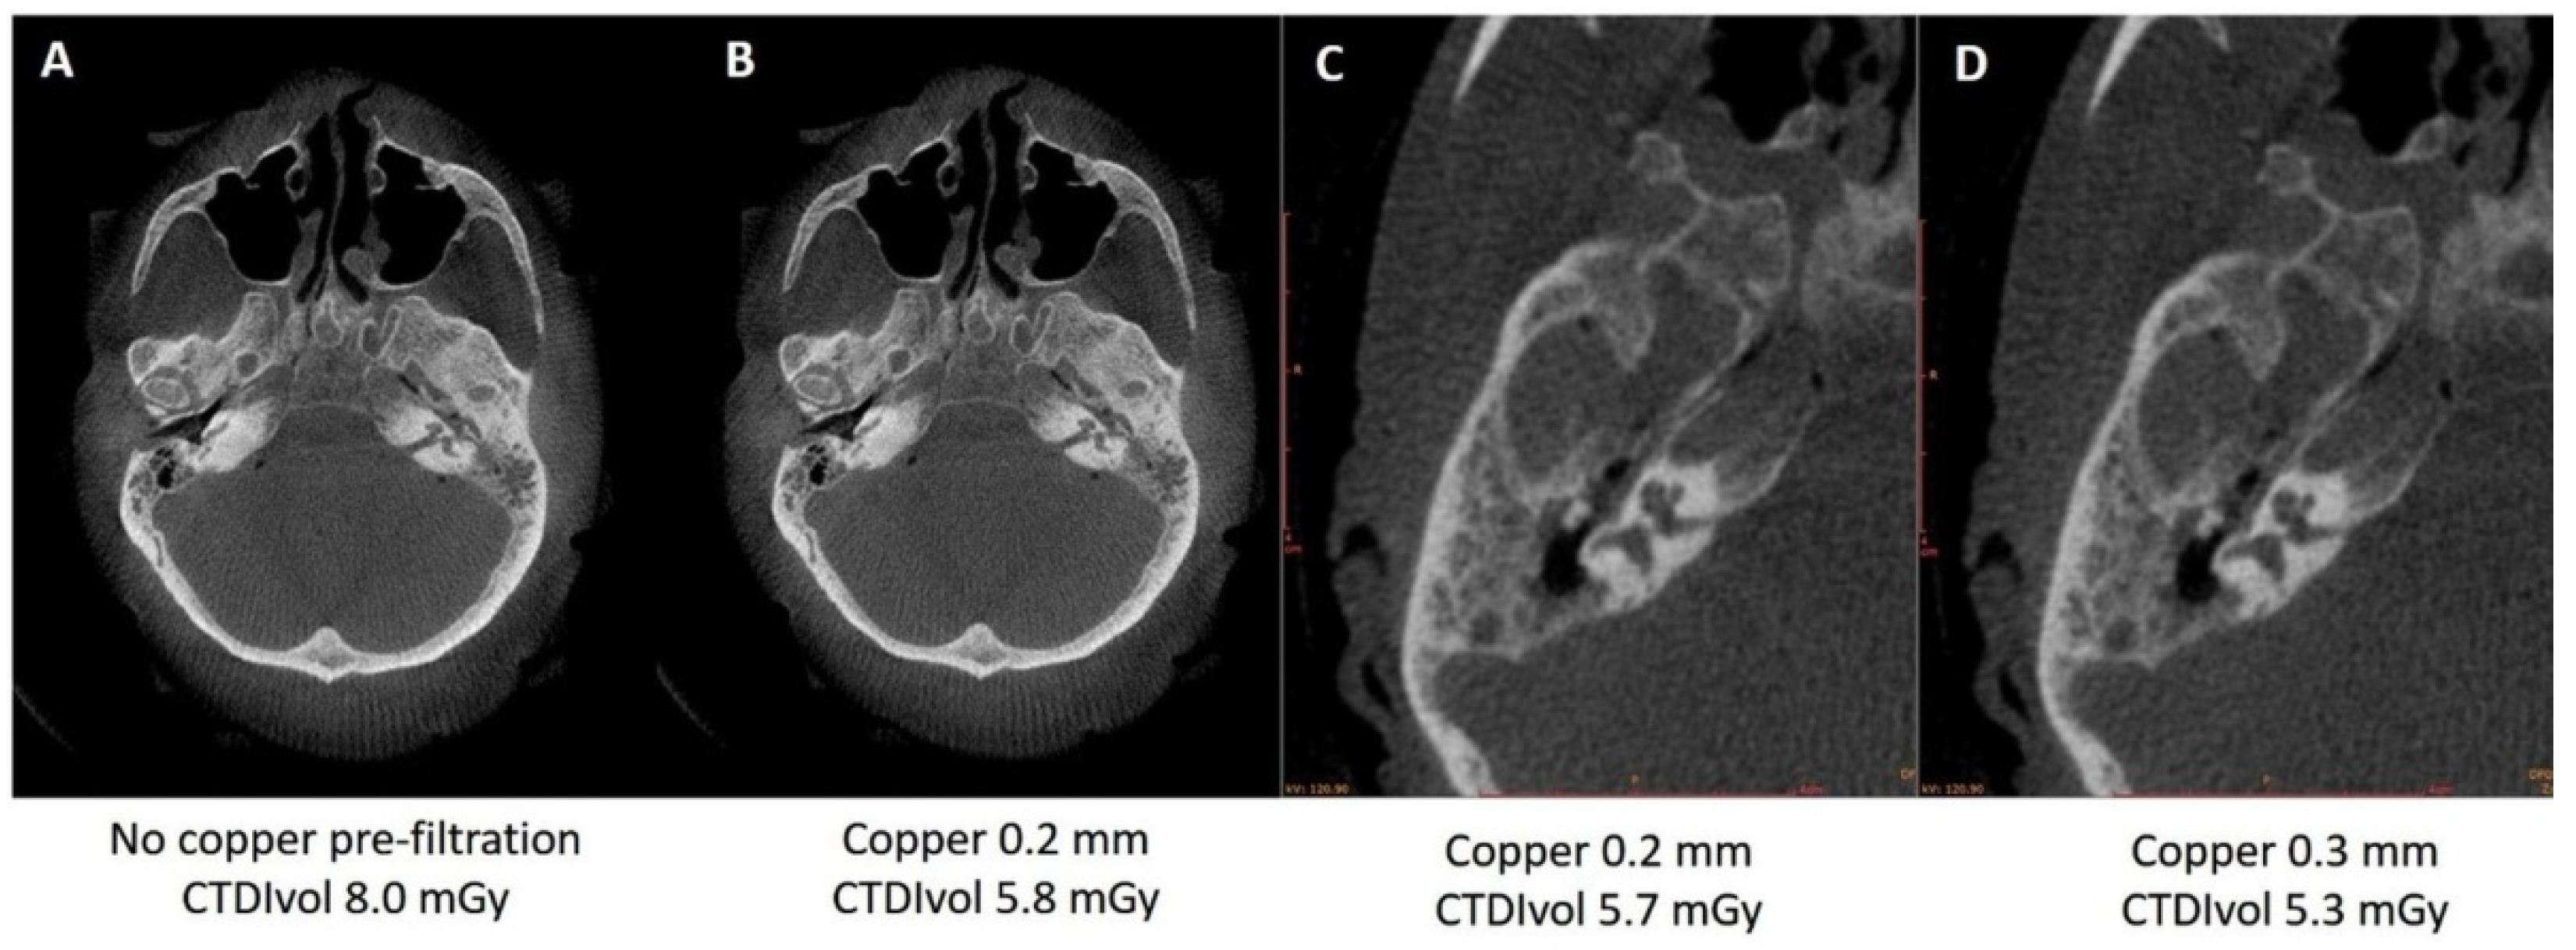 Applied Sciences Free Full Text Cone Beam Ct Imaging Of The Paranasal Region With A Multipurpose X Ray System Image Quality And Radiation Exposure Html